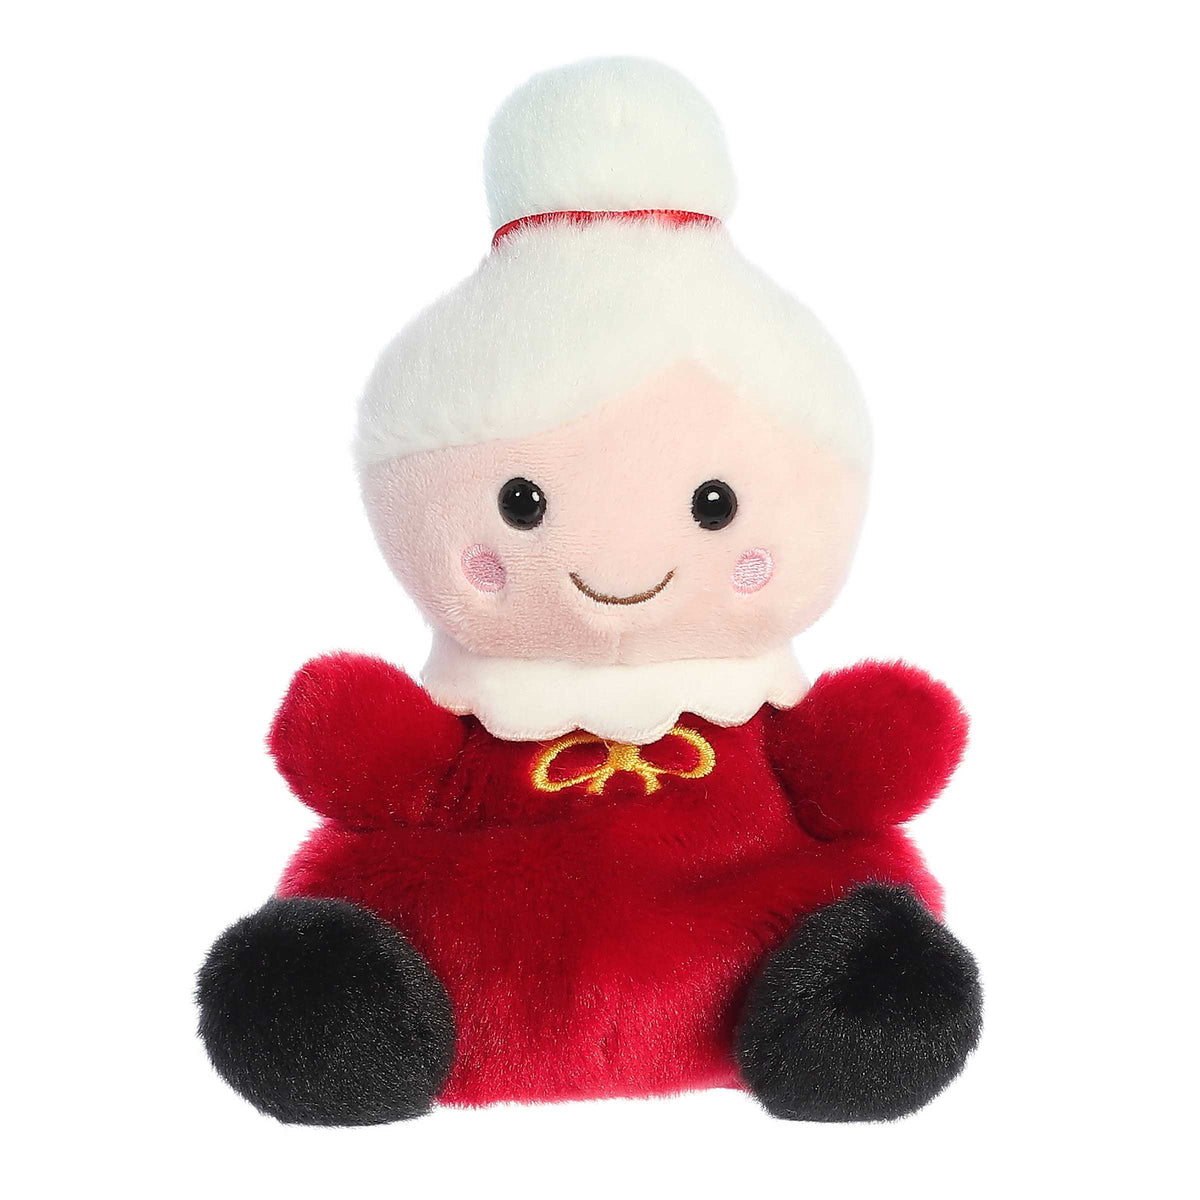 Adorable, happy, mini Mrs.Claus stuffed doll sitting, wearing a red dress and black shoes